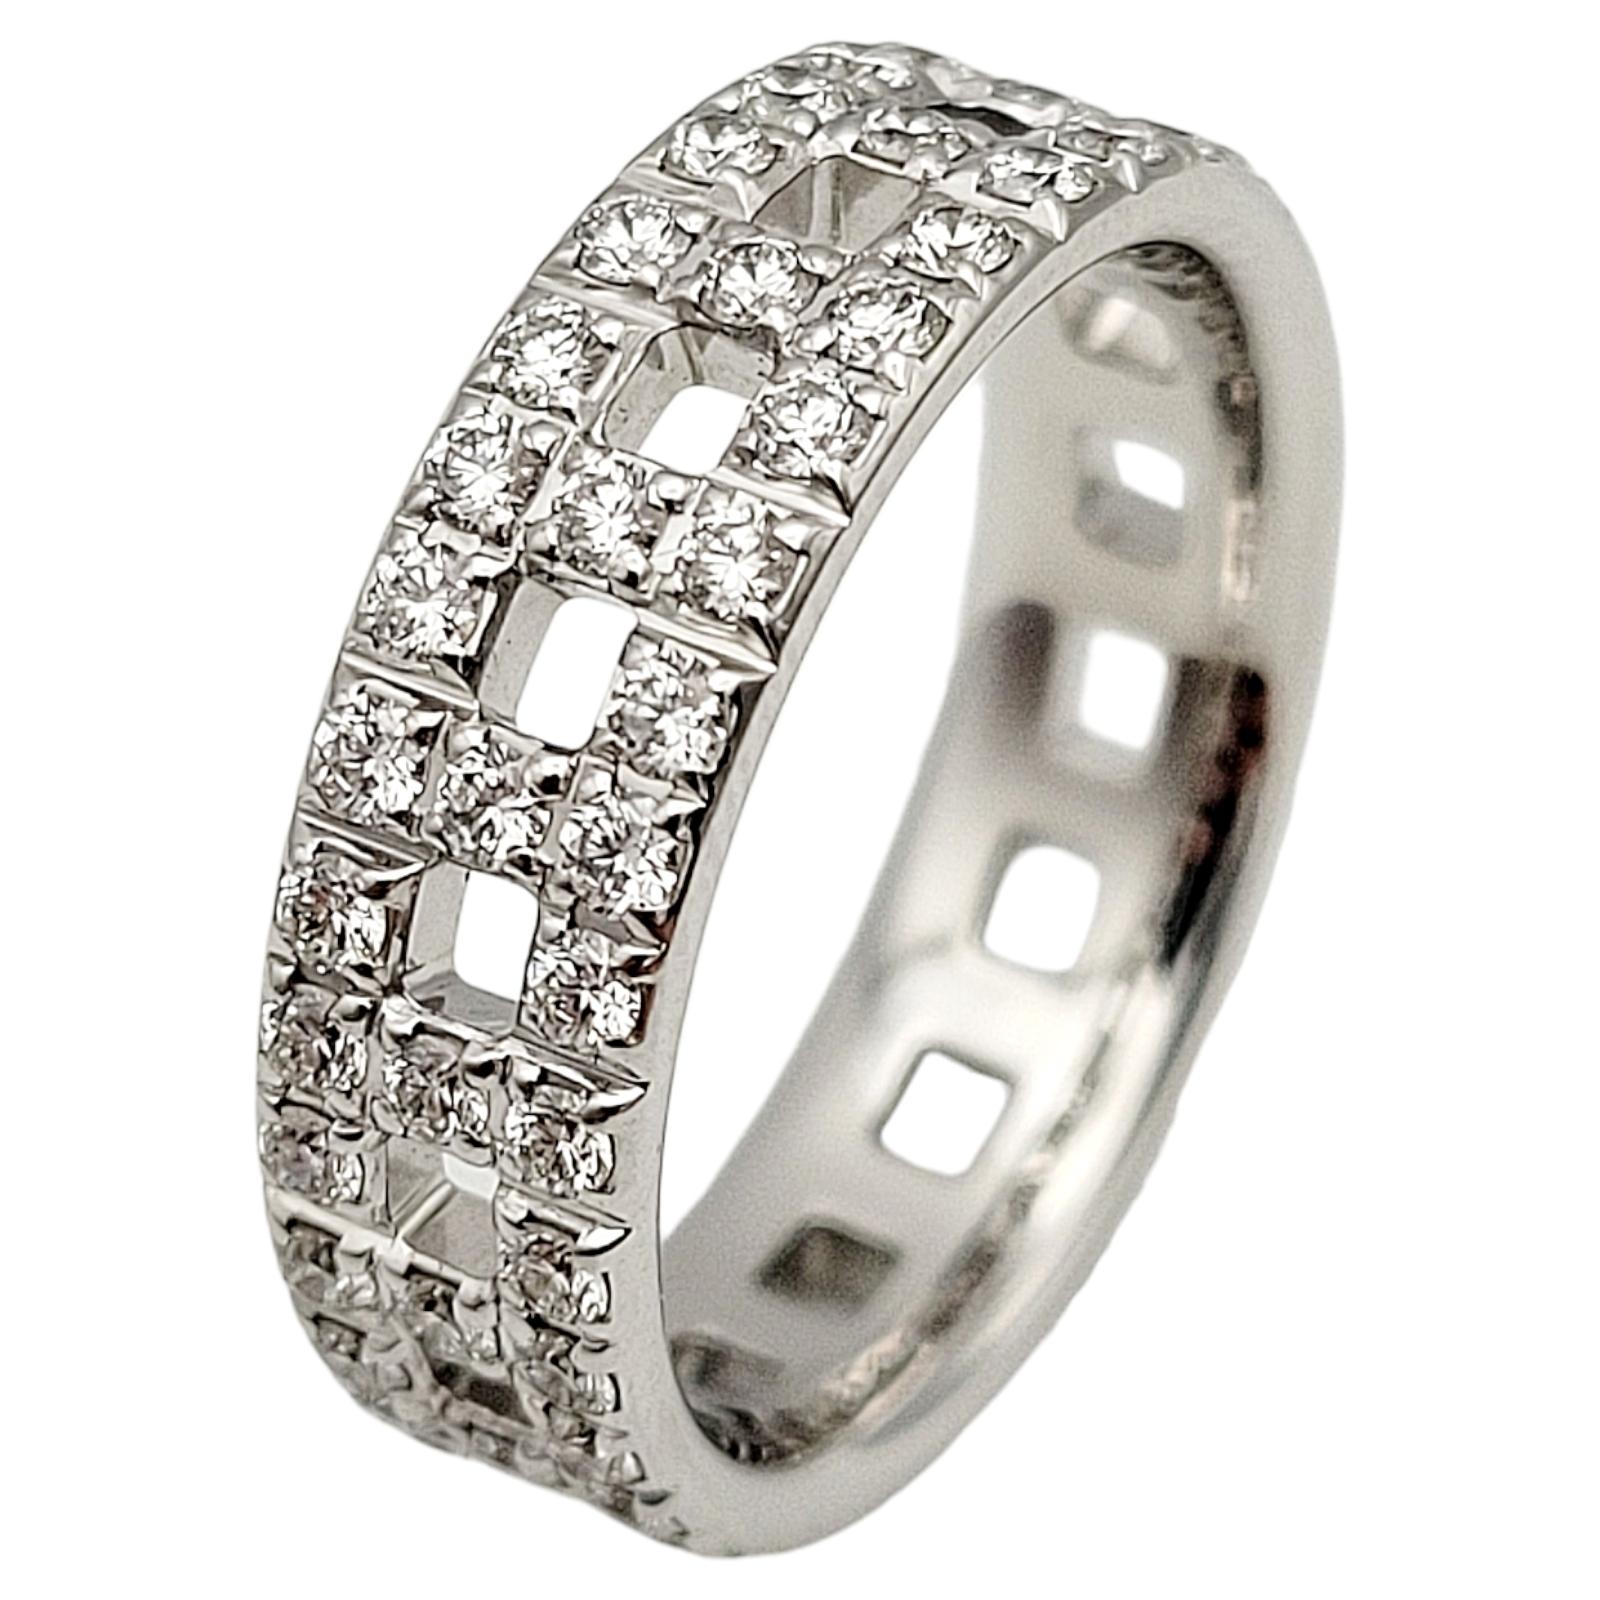 Women's Tiffany & Co. Tiffany T True Wide Band Ring with Diamonds in 18 Karat White Gold